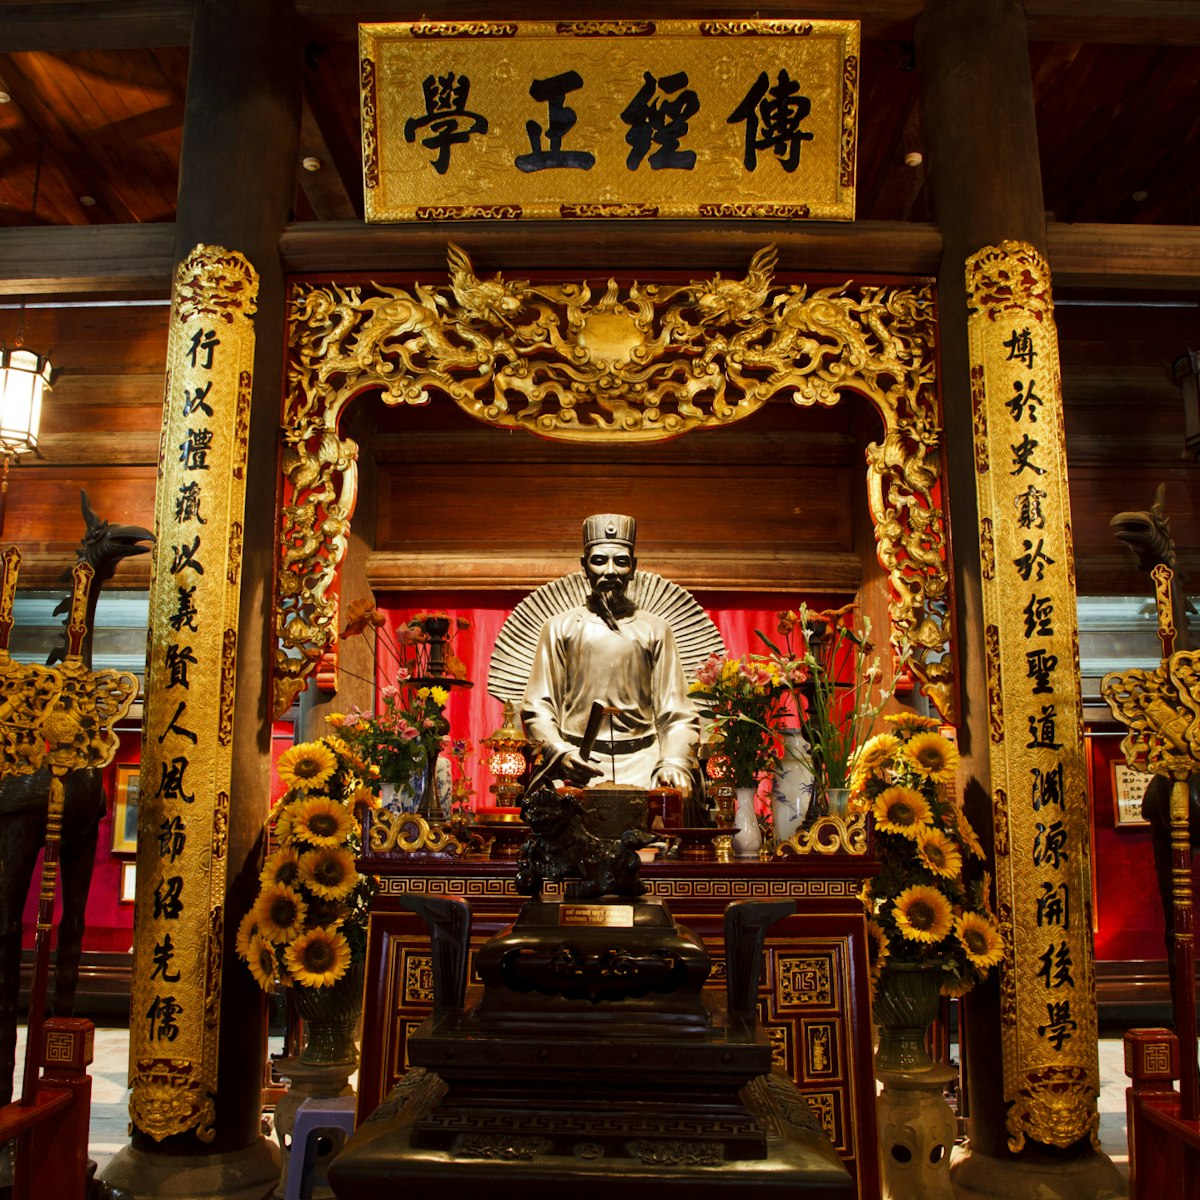 Interior of the Temple of Literature, known locally as Van Mieu, home to the shrine to Confucius named Van Mieu.